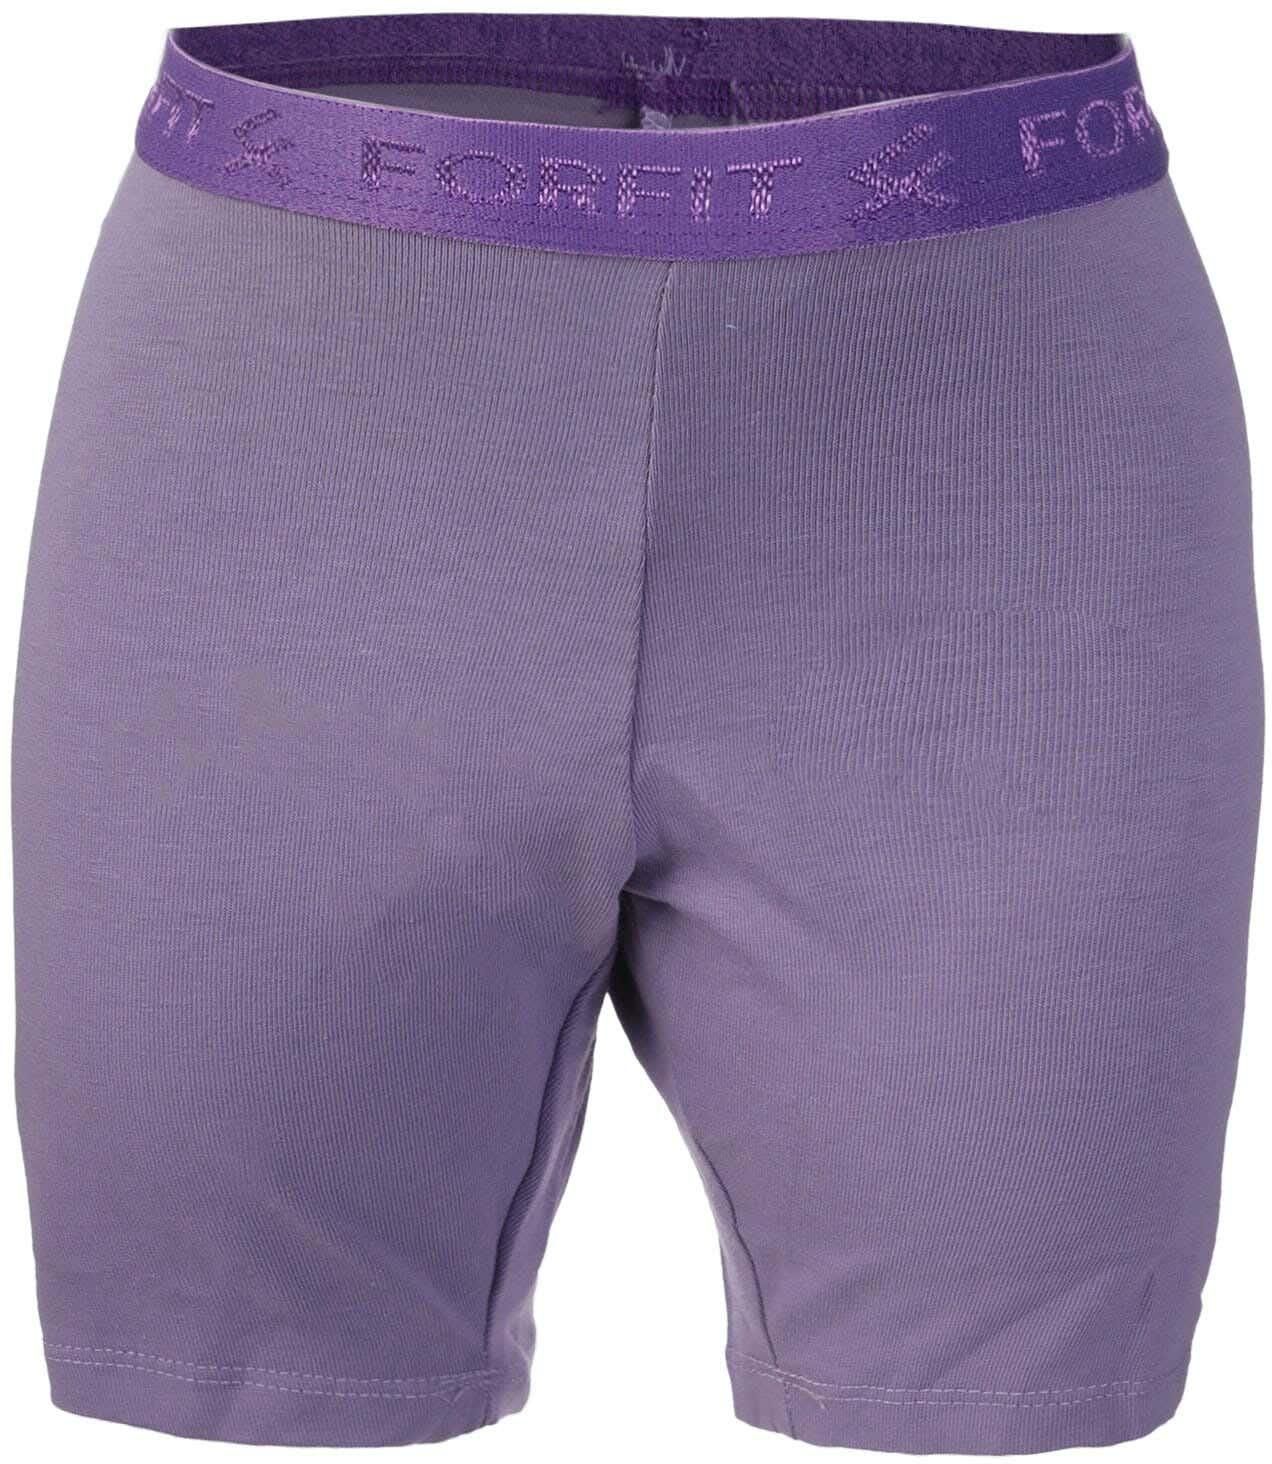 Get Forfit Lycra Hot Short for Girls, Size 8 - Mauve with best offers | Raneen.com